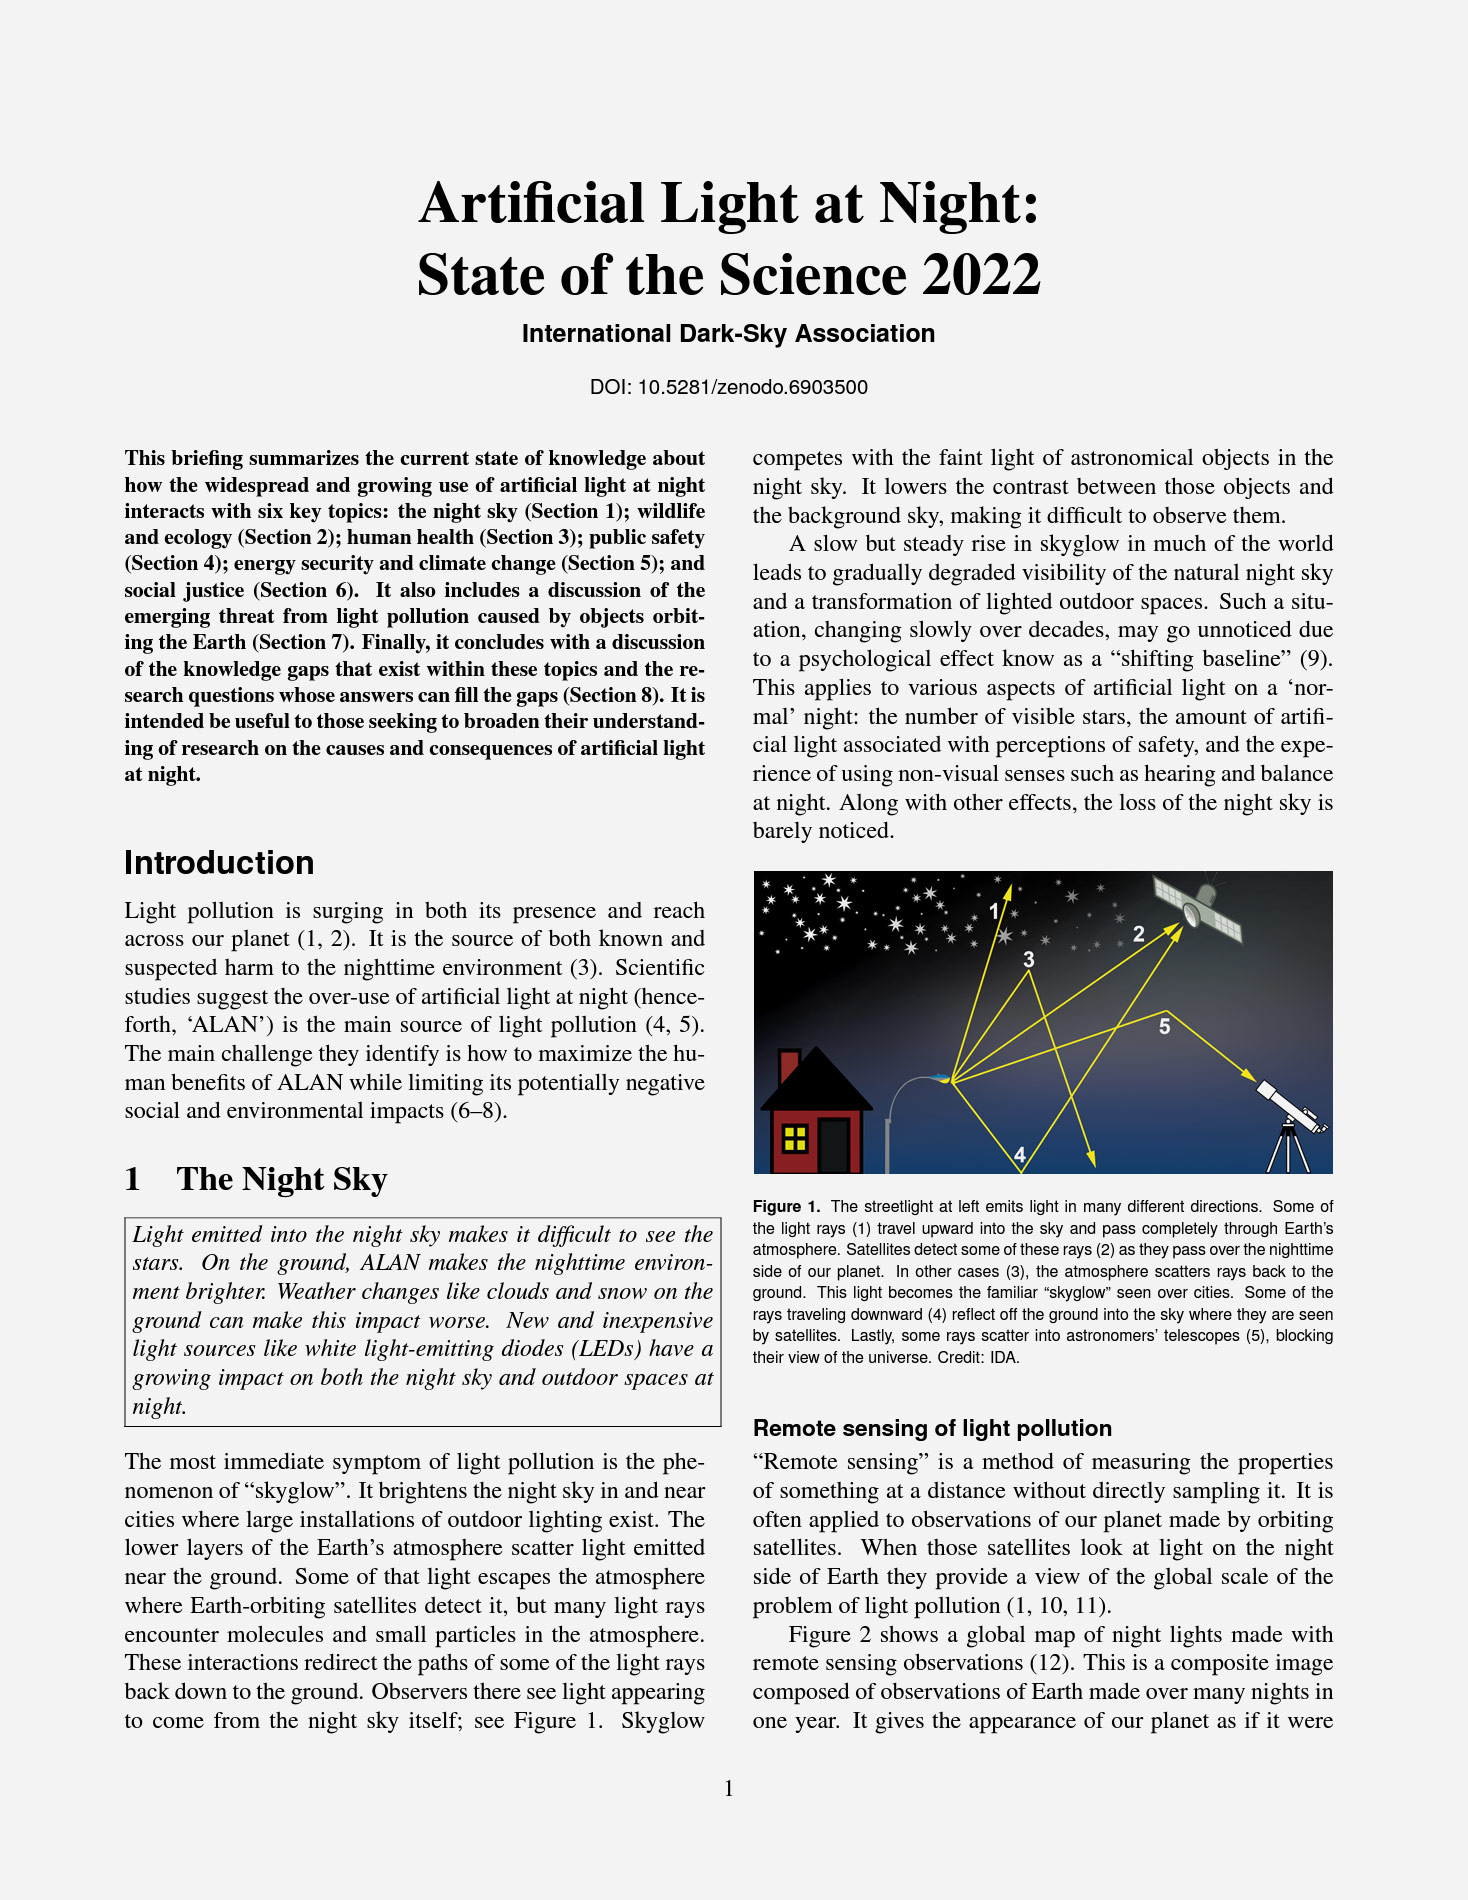 First page of the publication “Artificial Light at Night: State of the Science 2022” (PDF)